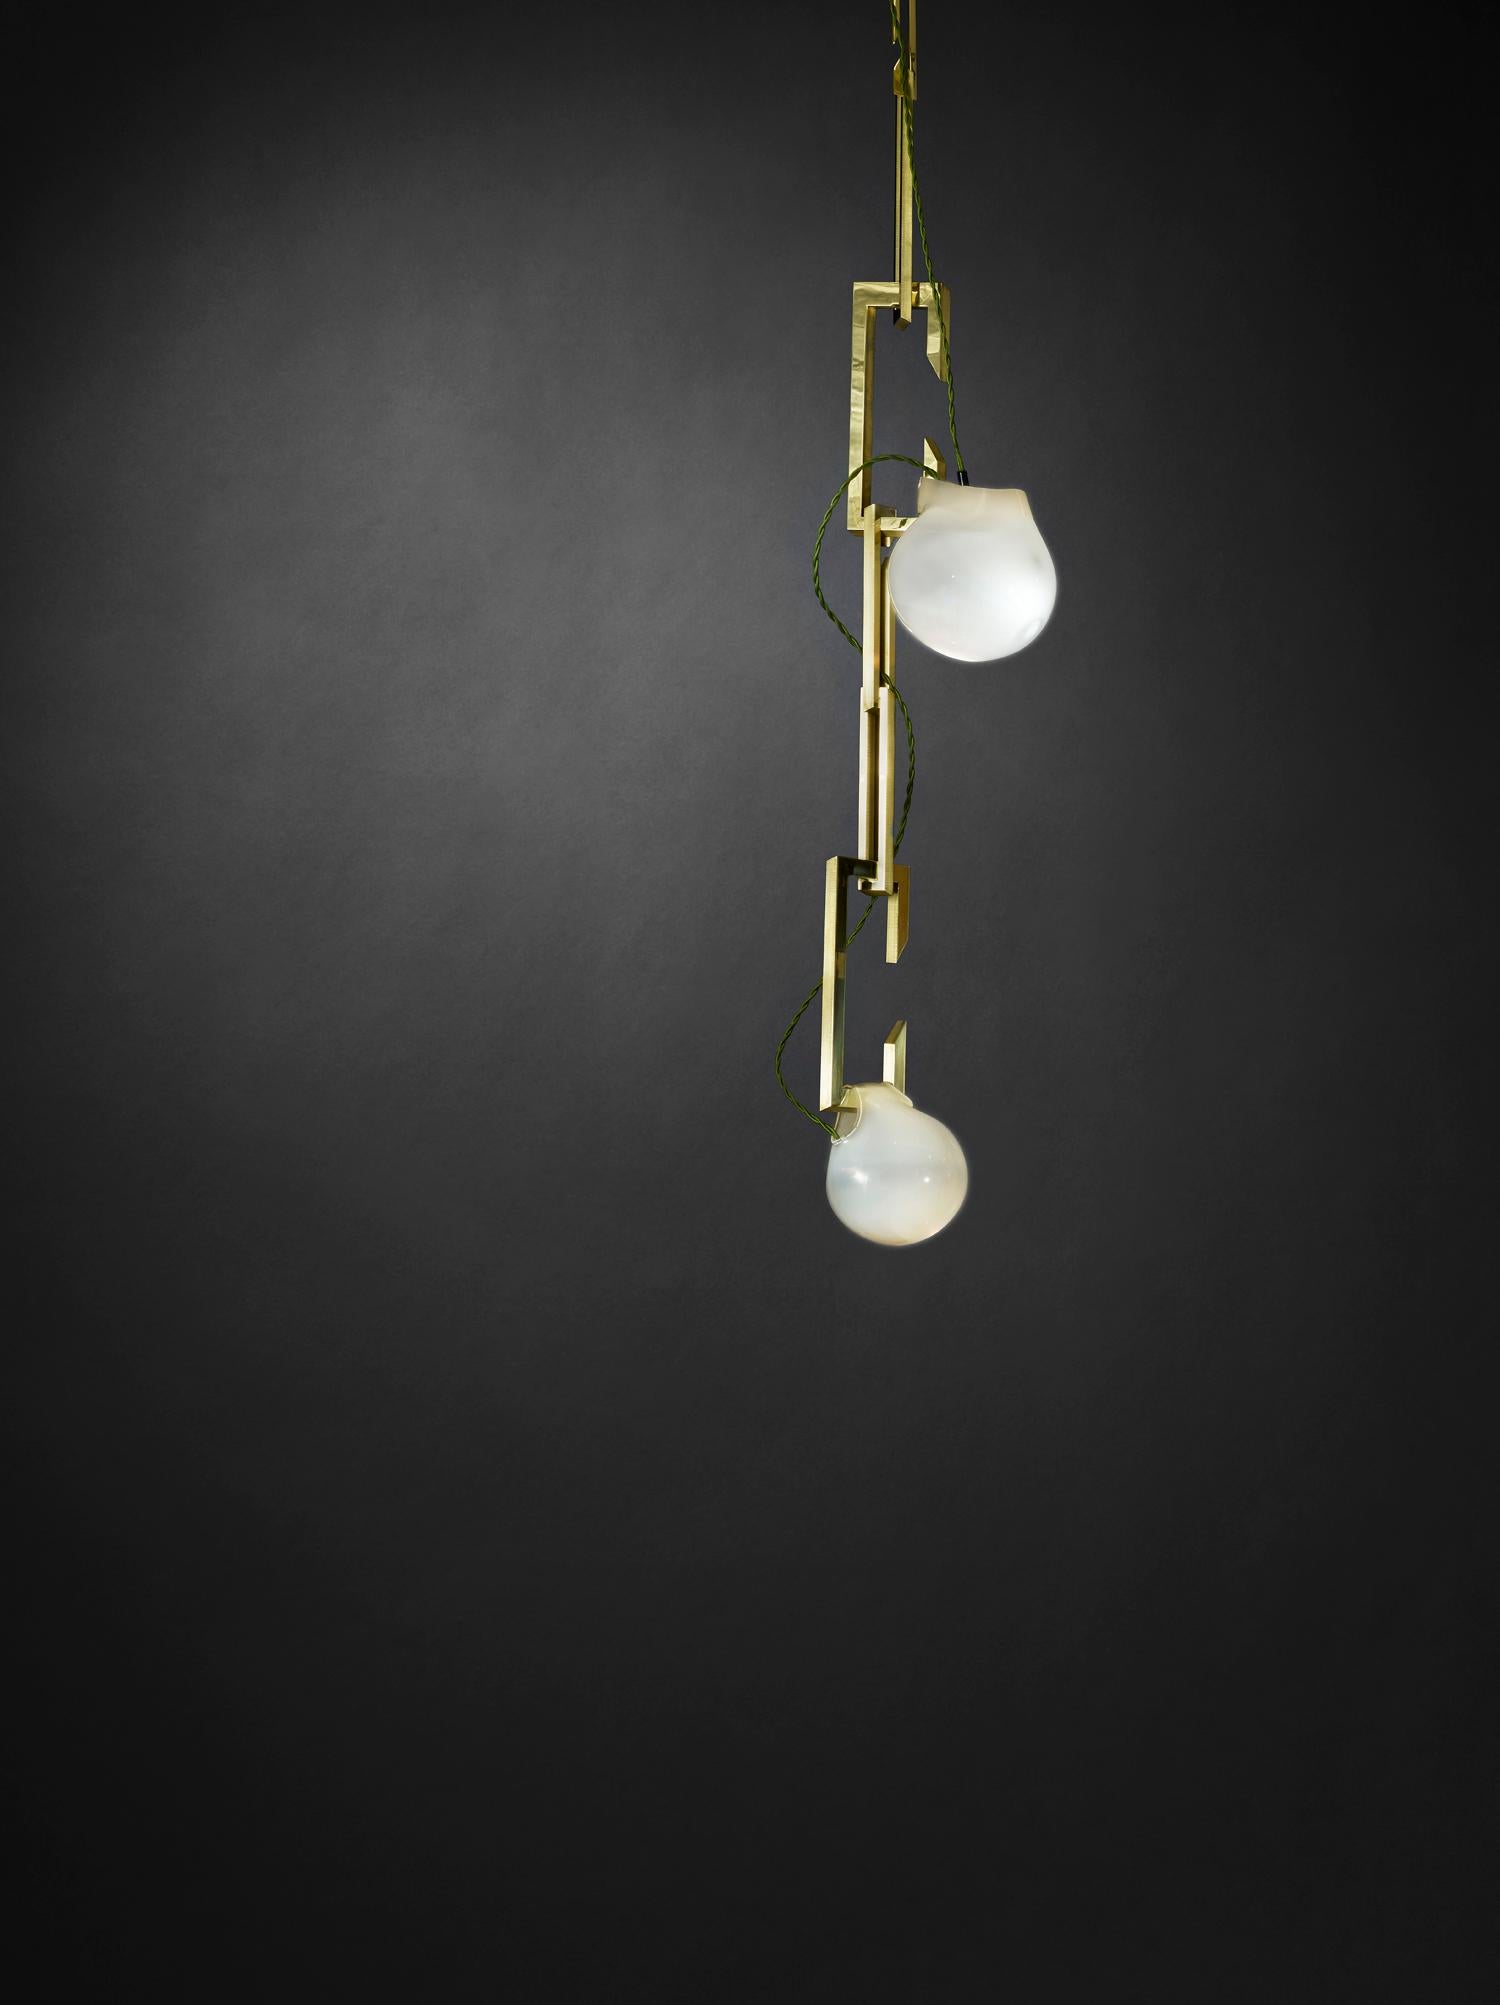 Australian Contemporary Brass Light Pendant, Nephentes Cordon/Tendril by Christopher Boots For Sale